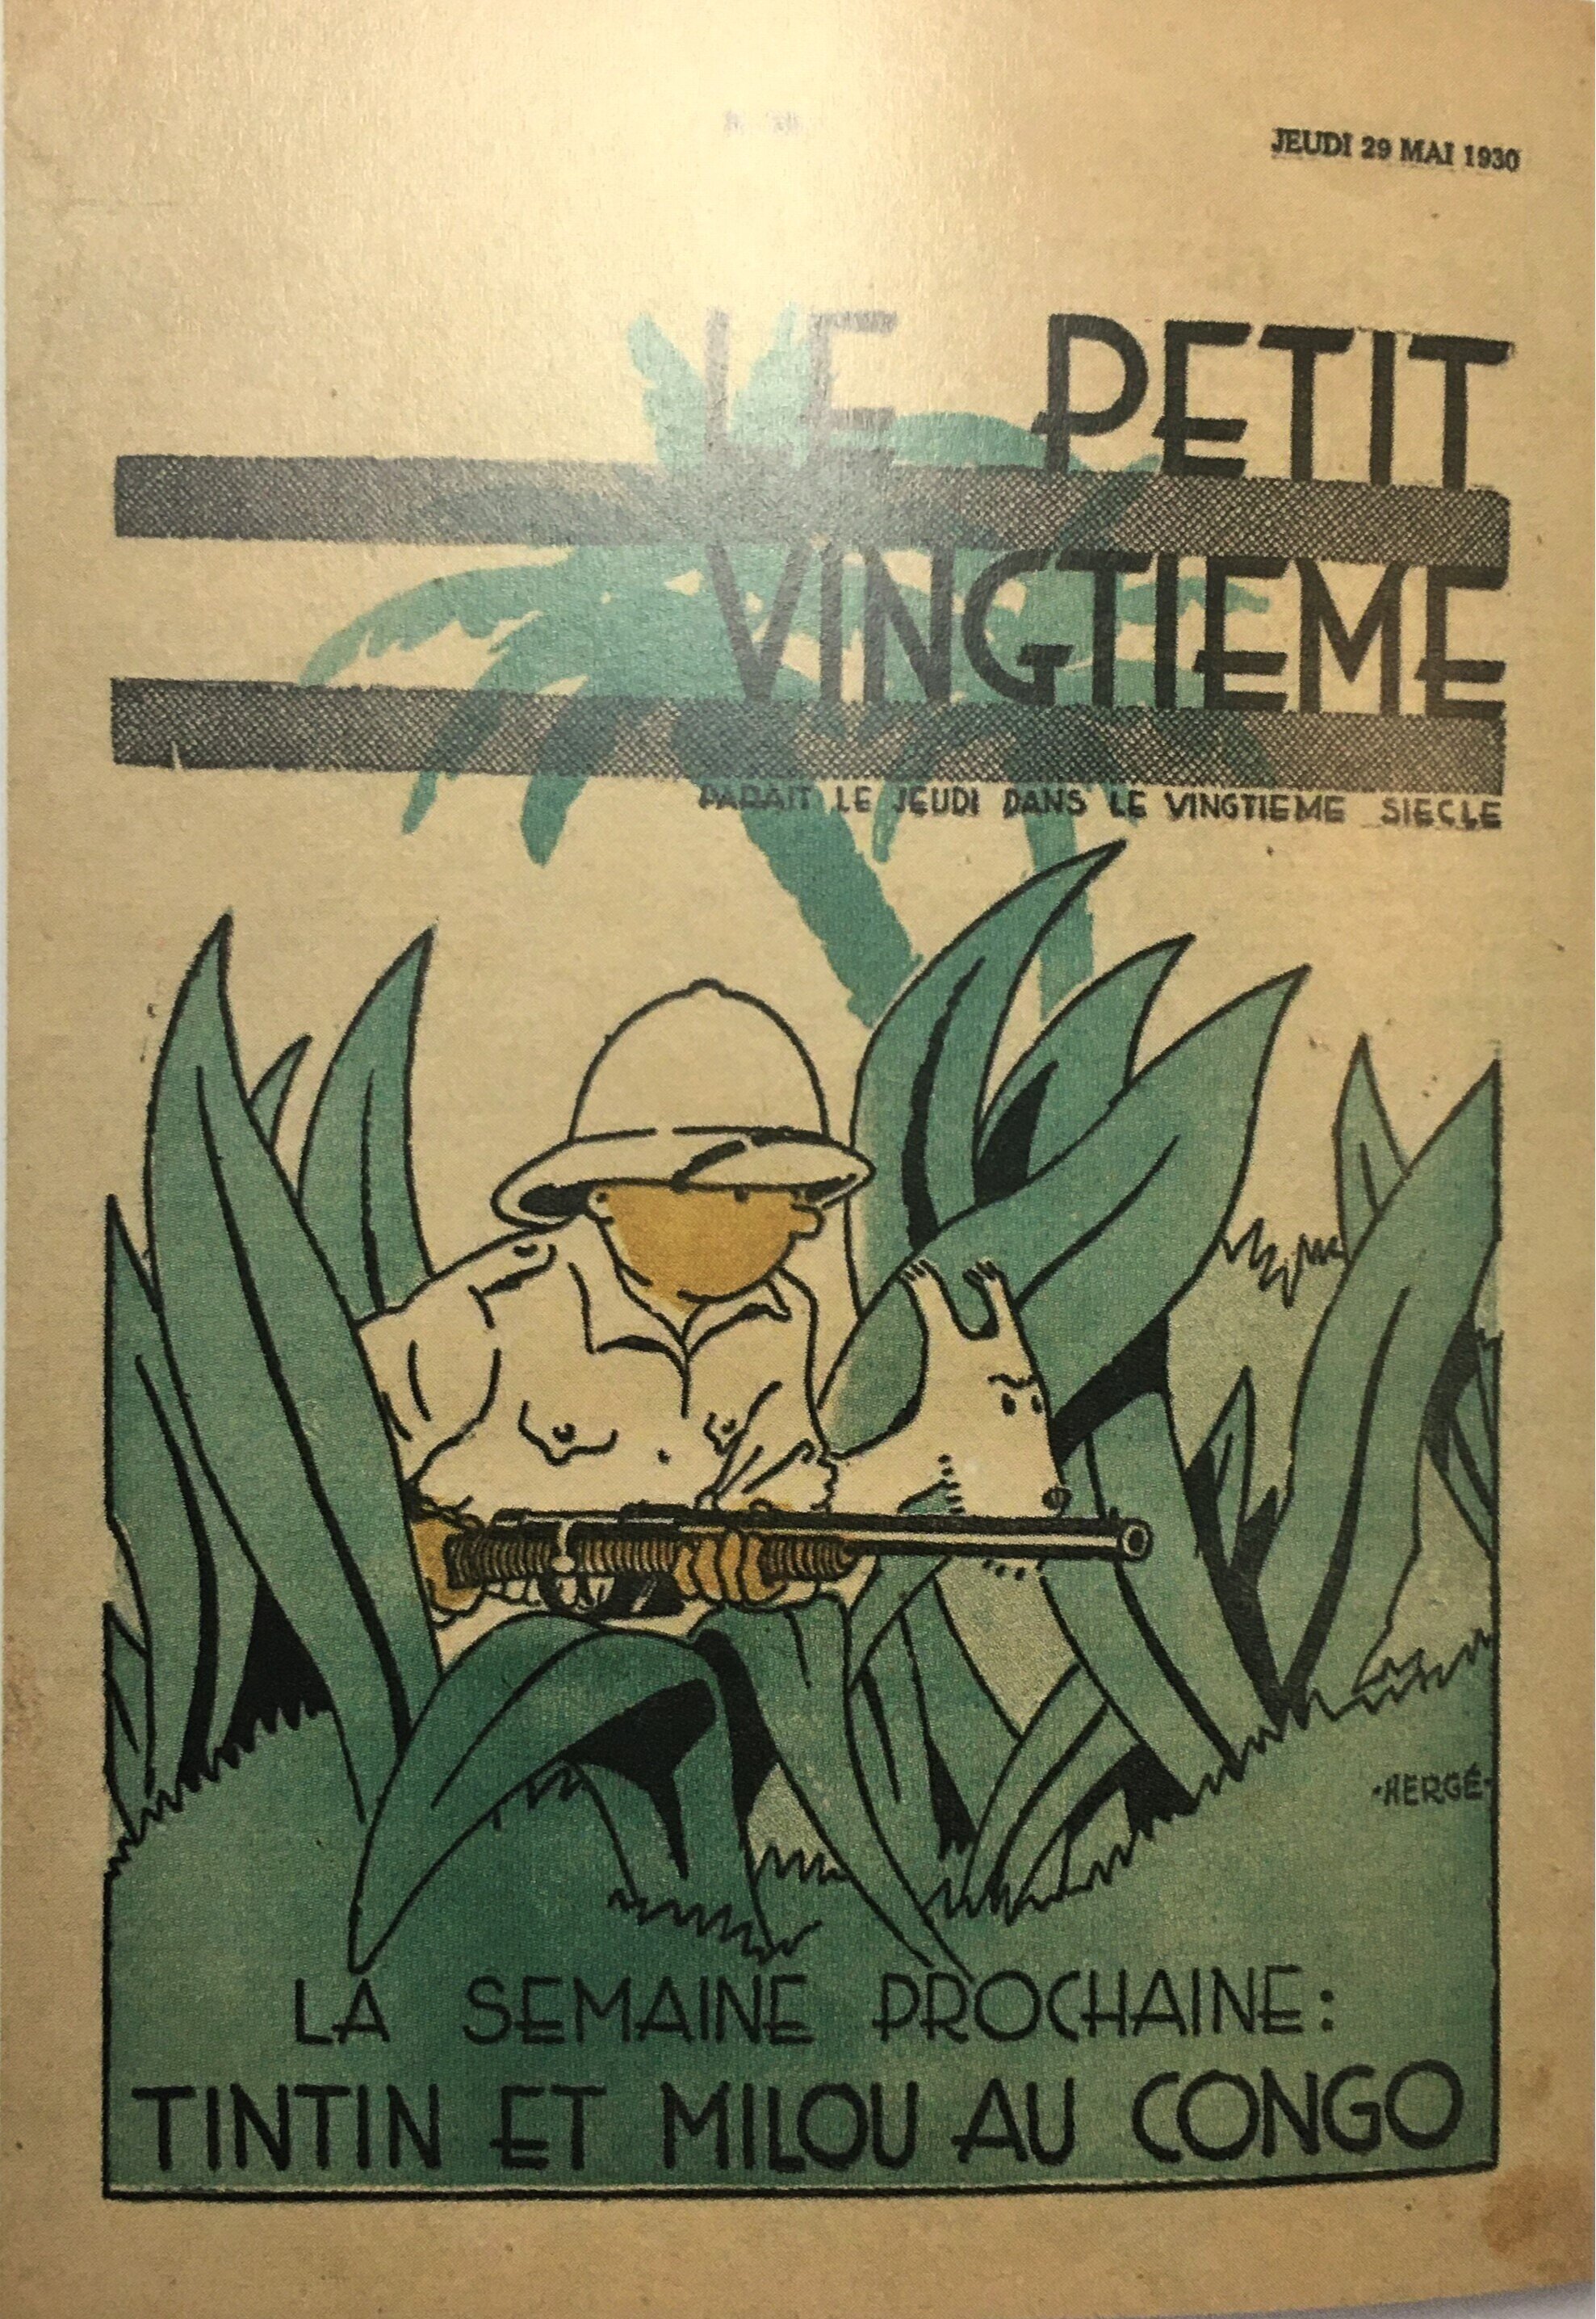  Cover of  Le Petit Vingiteme,  May 29, 1930.  Maricq, Dominique.  Herge and the Treasures of Tintin . Goodman, 2014. 